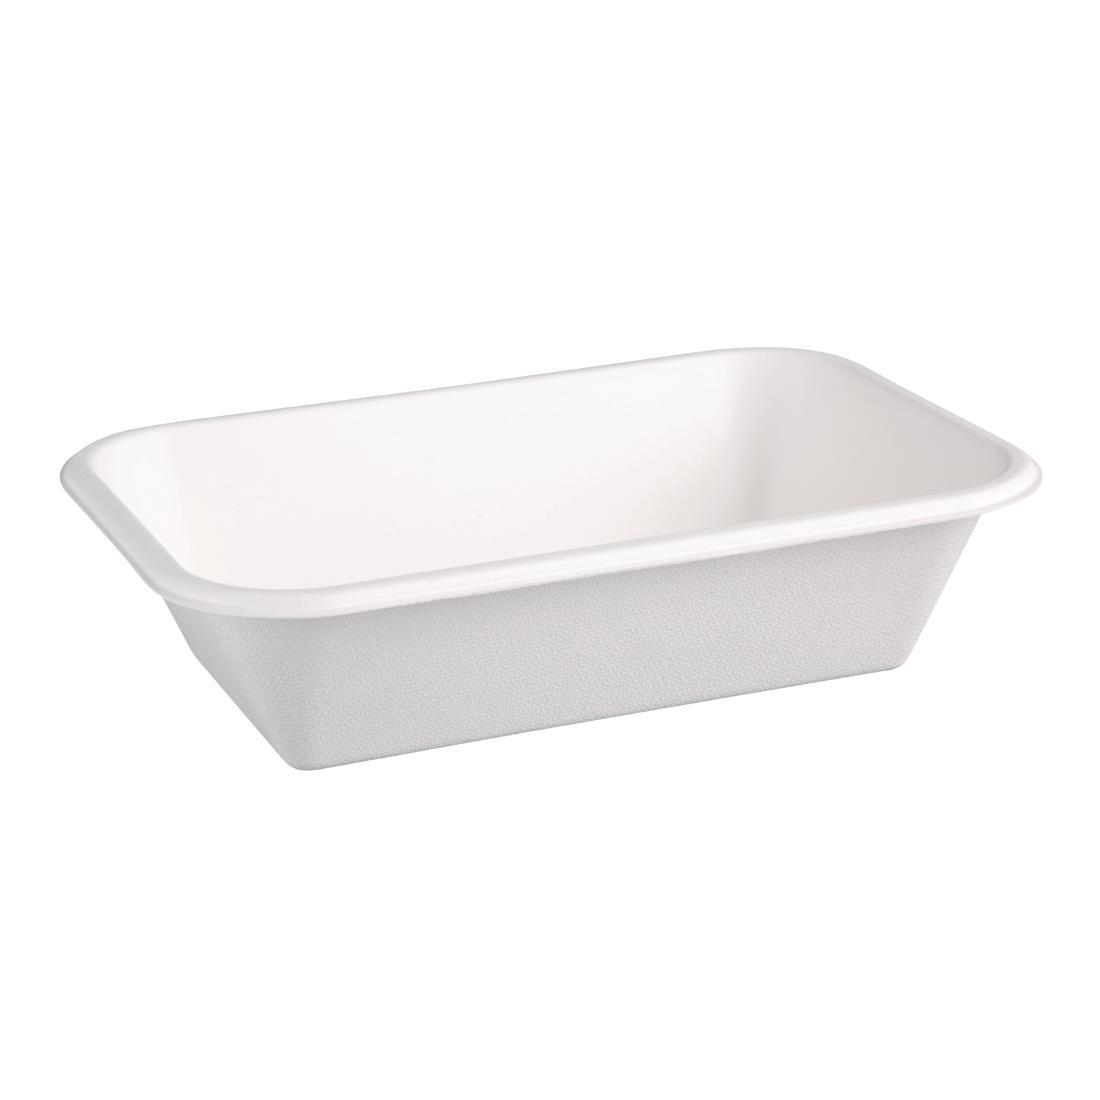 Fiesta Compostable Bagasse Food Trays 32oz (Pack of 50) - DW349  - 2